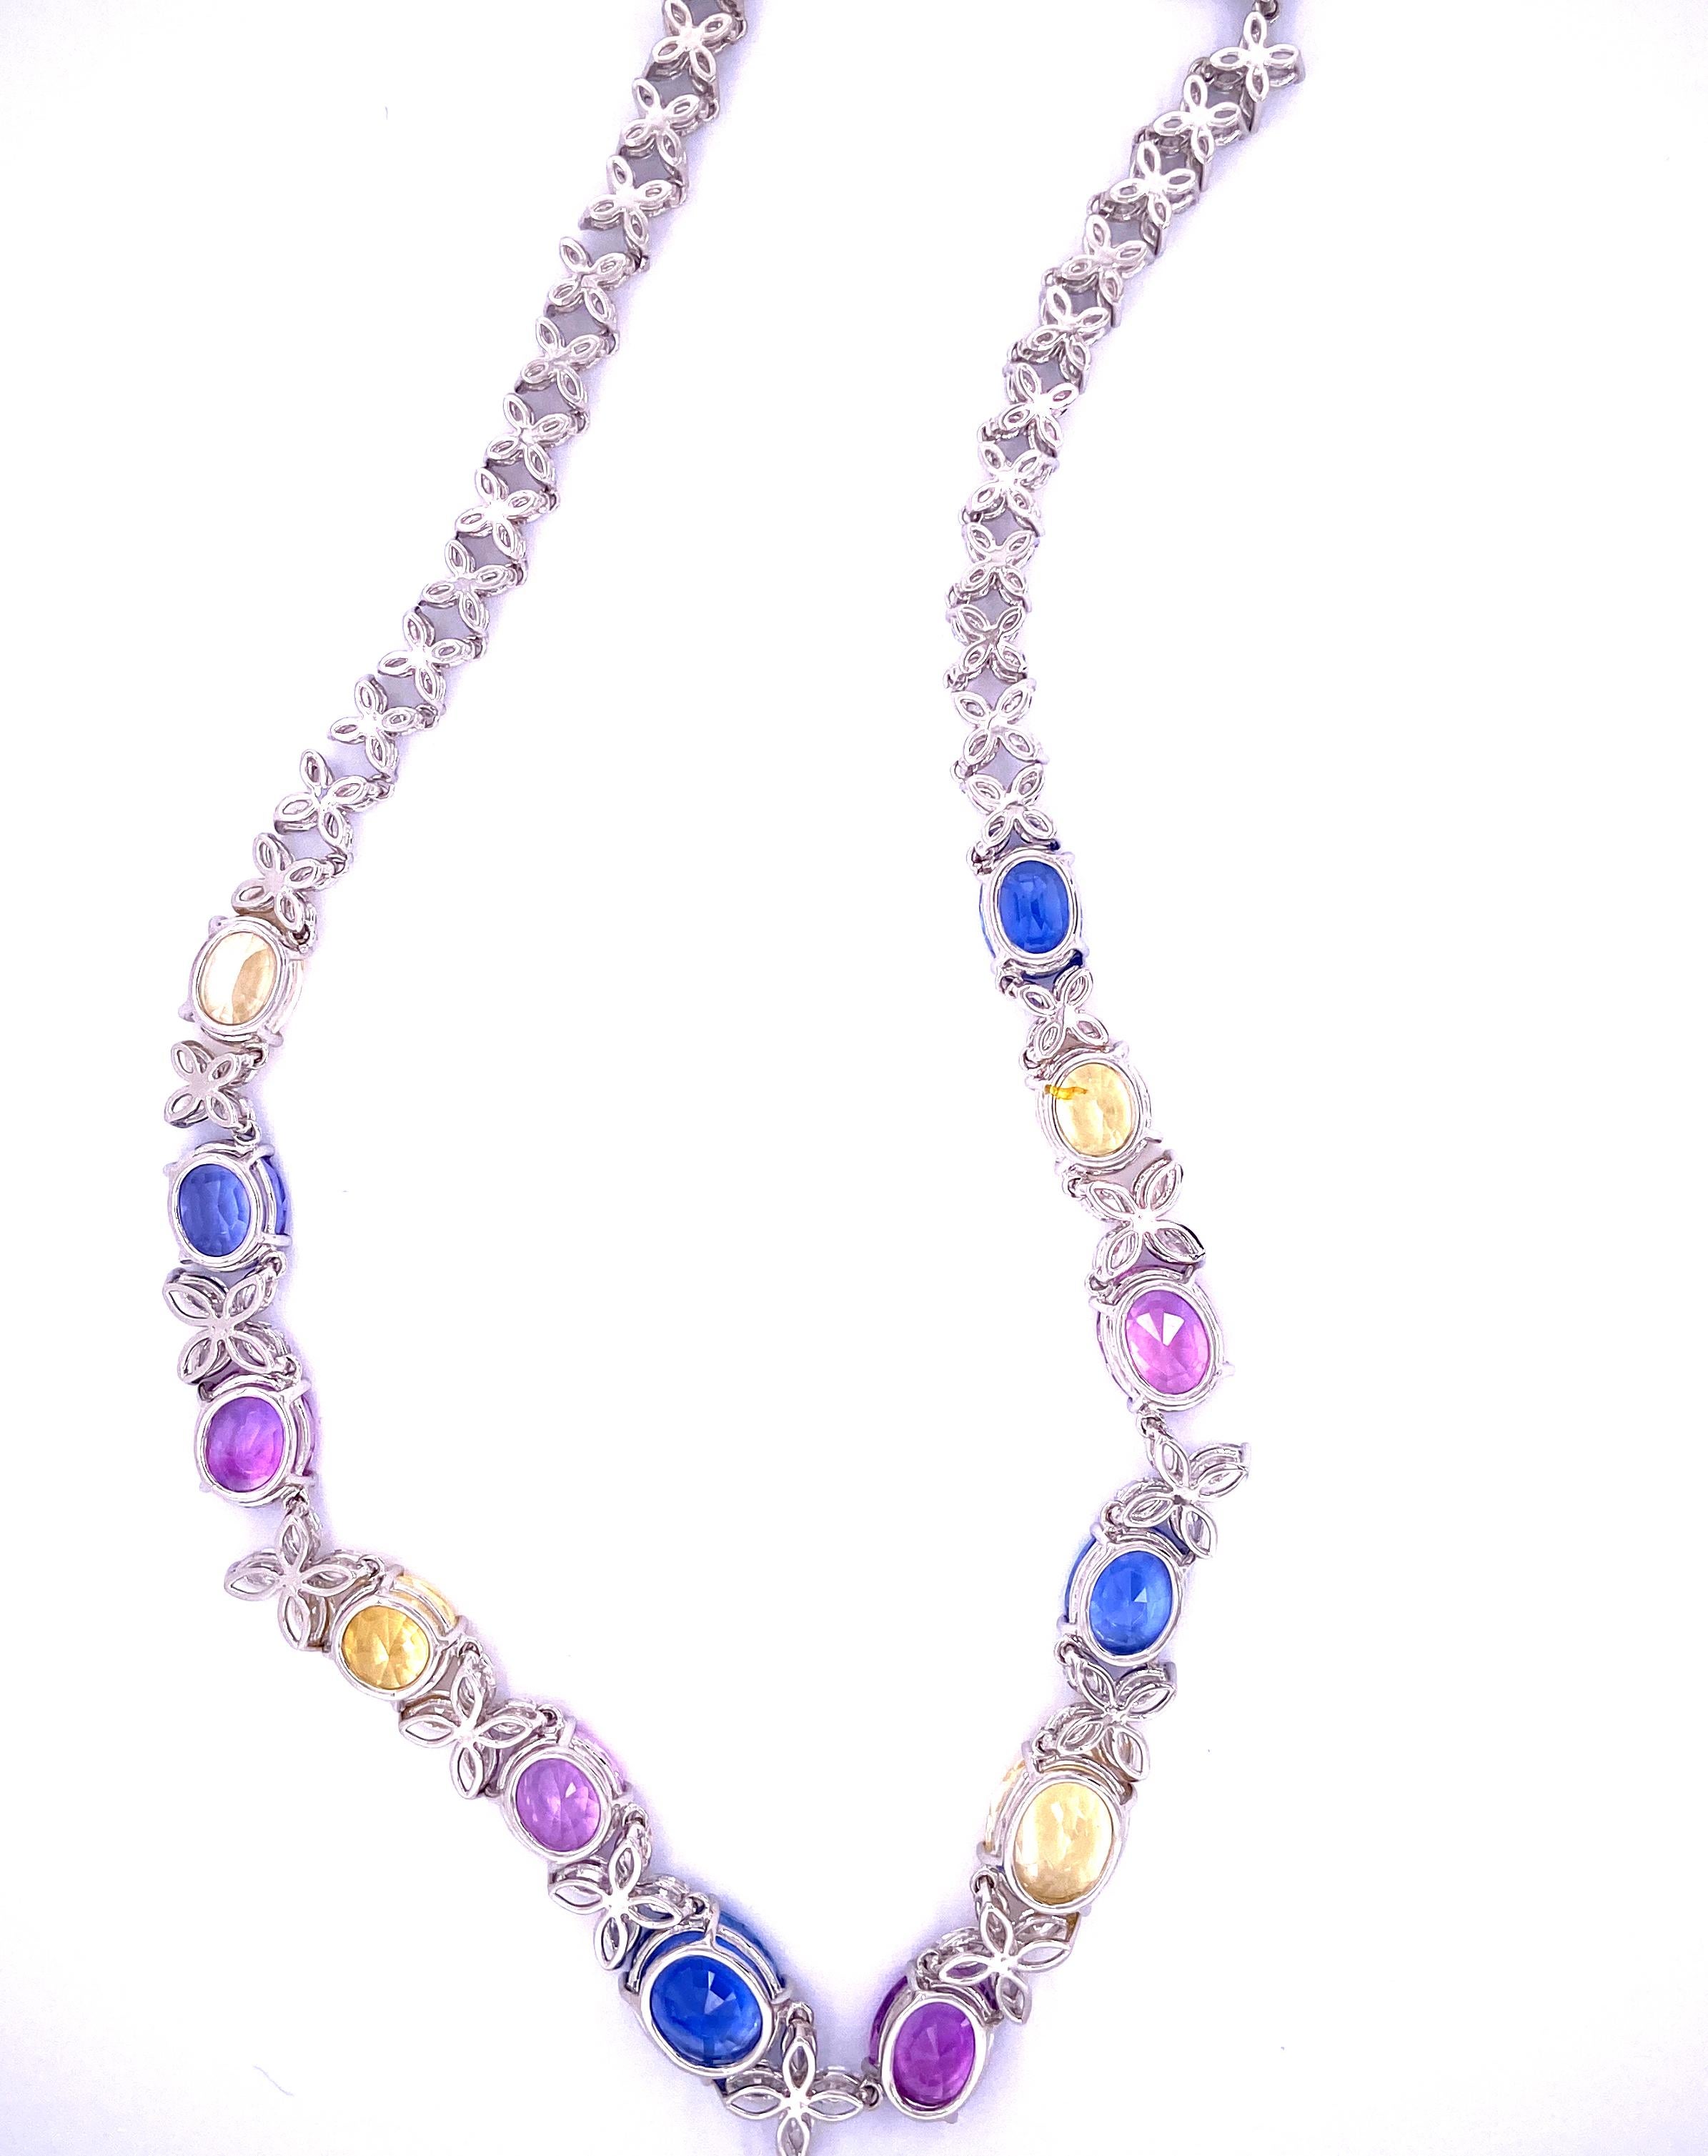 71.49 Carat GIA Certified Unheated Sapphire and White Diamond Gold Necklace For Sale 4